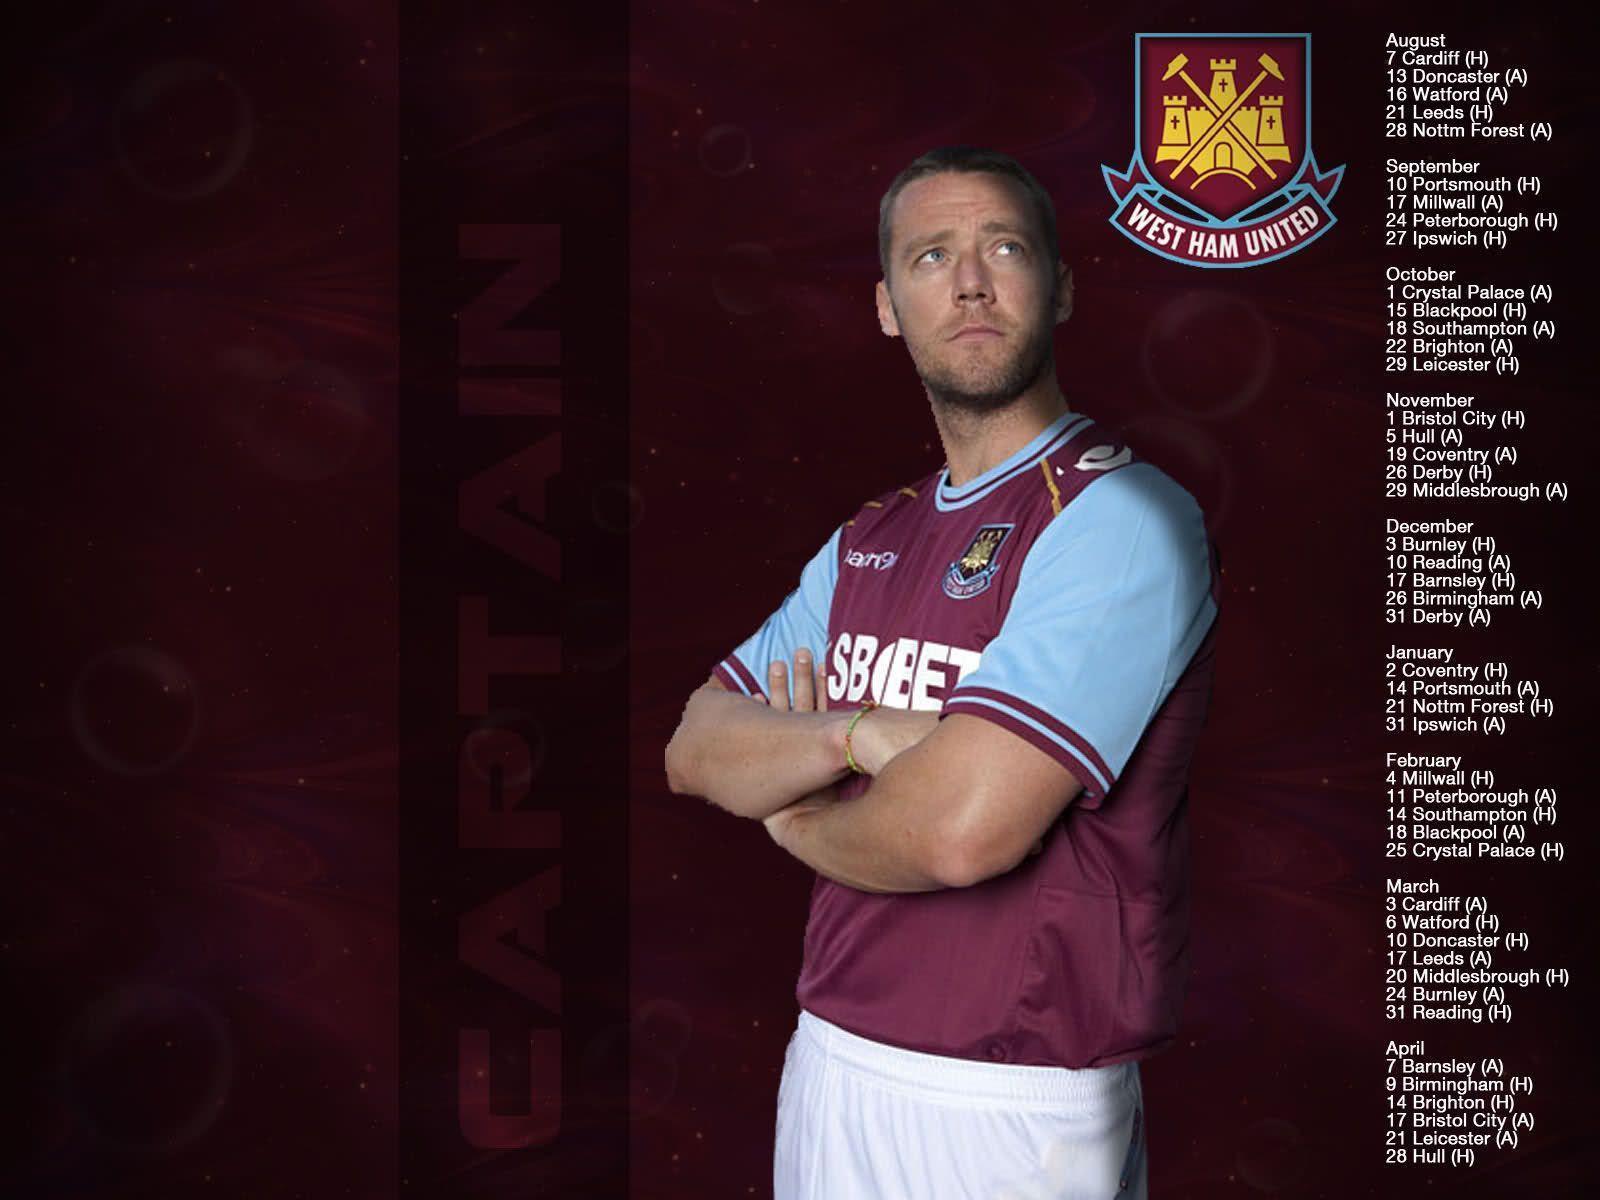 The famous football club West Ham united wallpaper and image